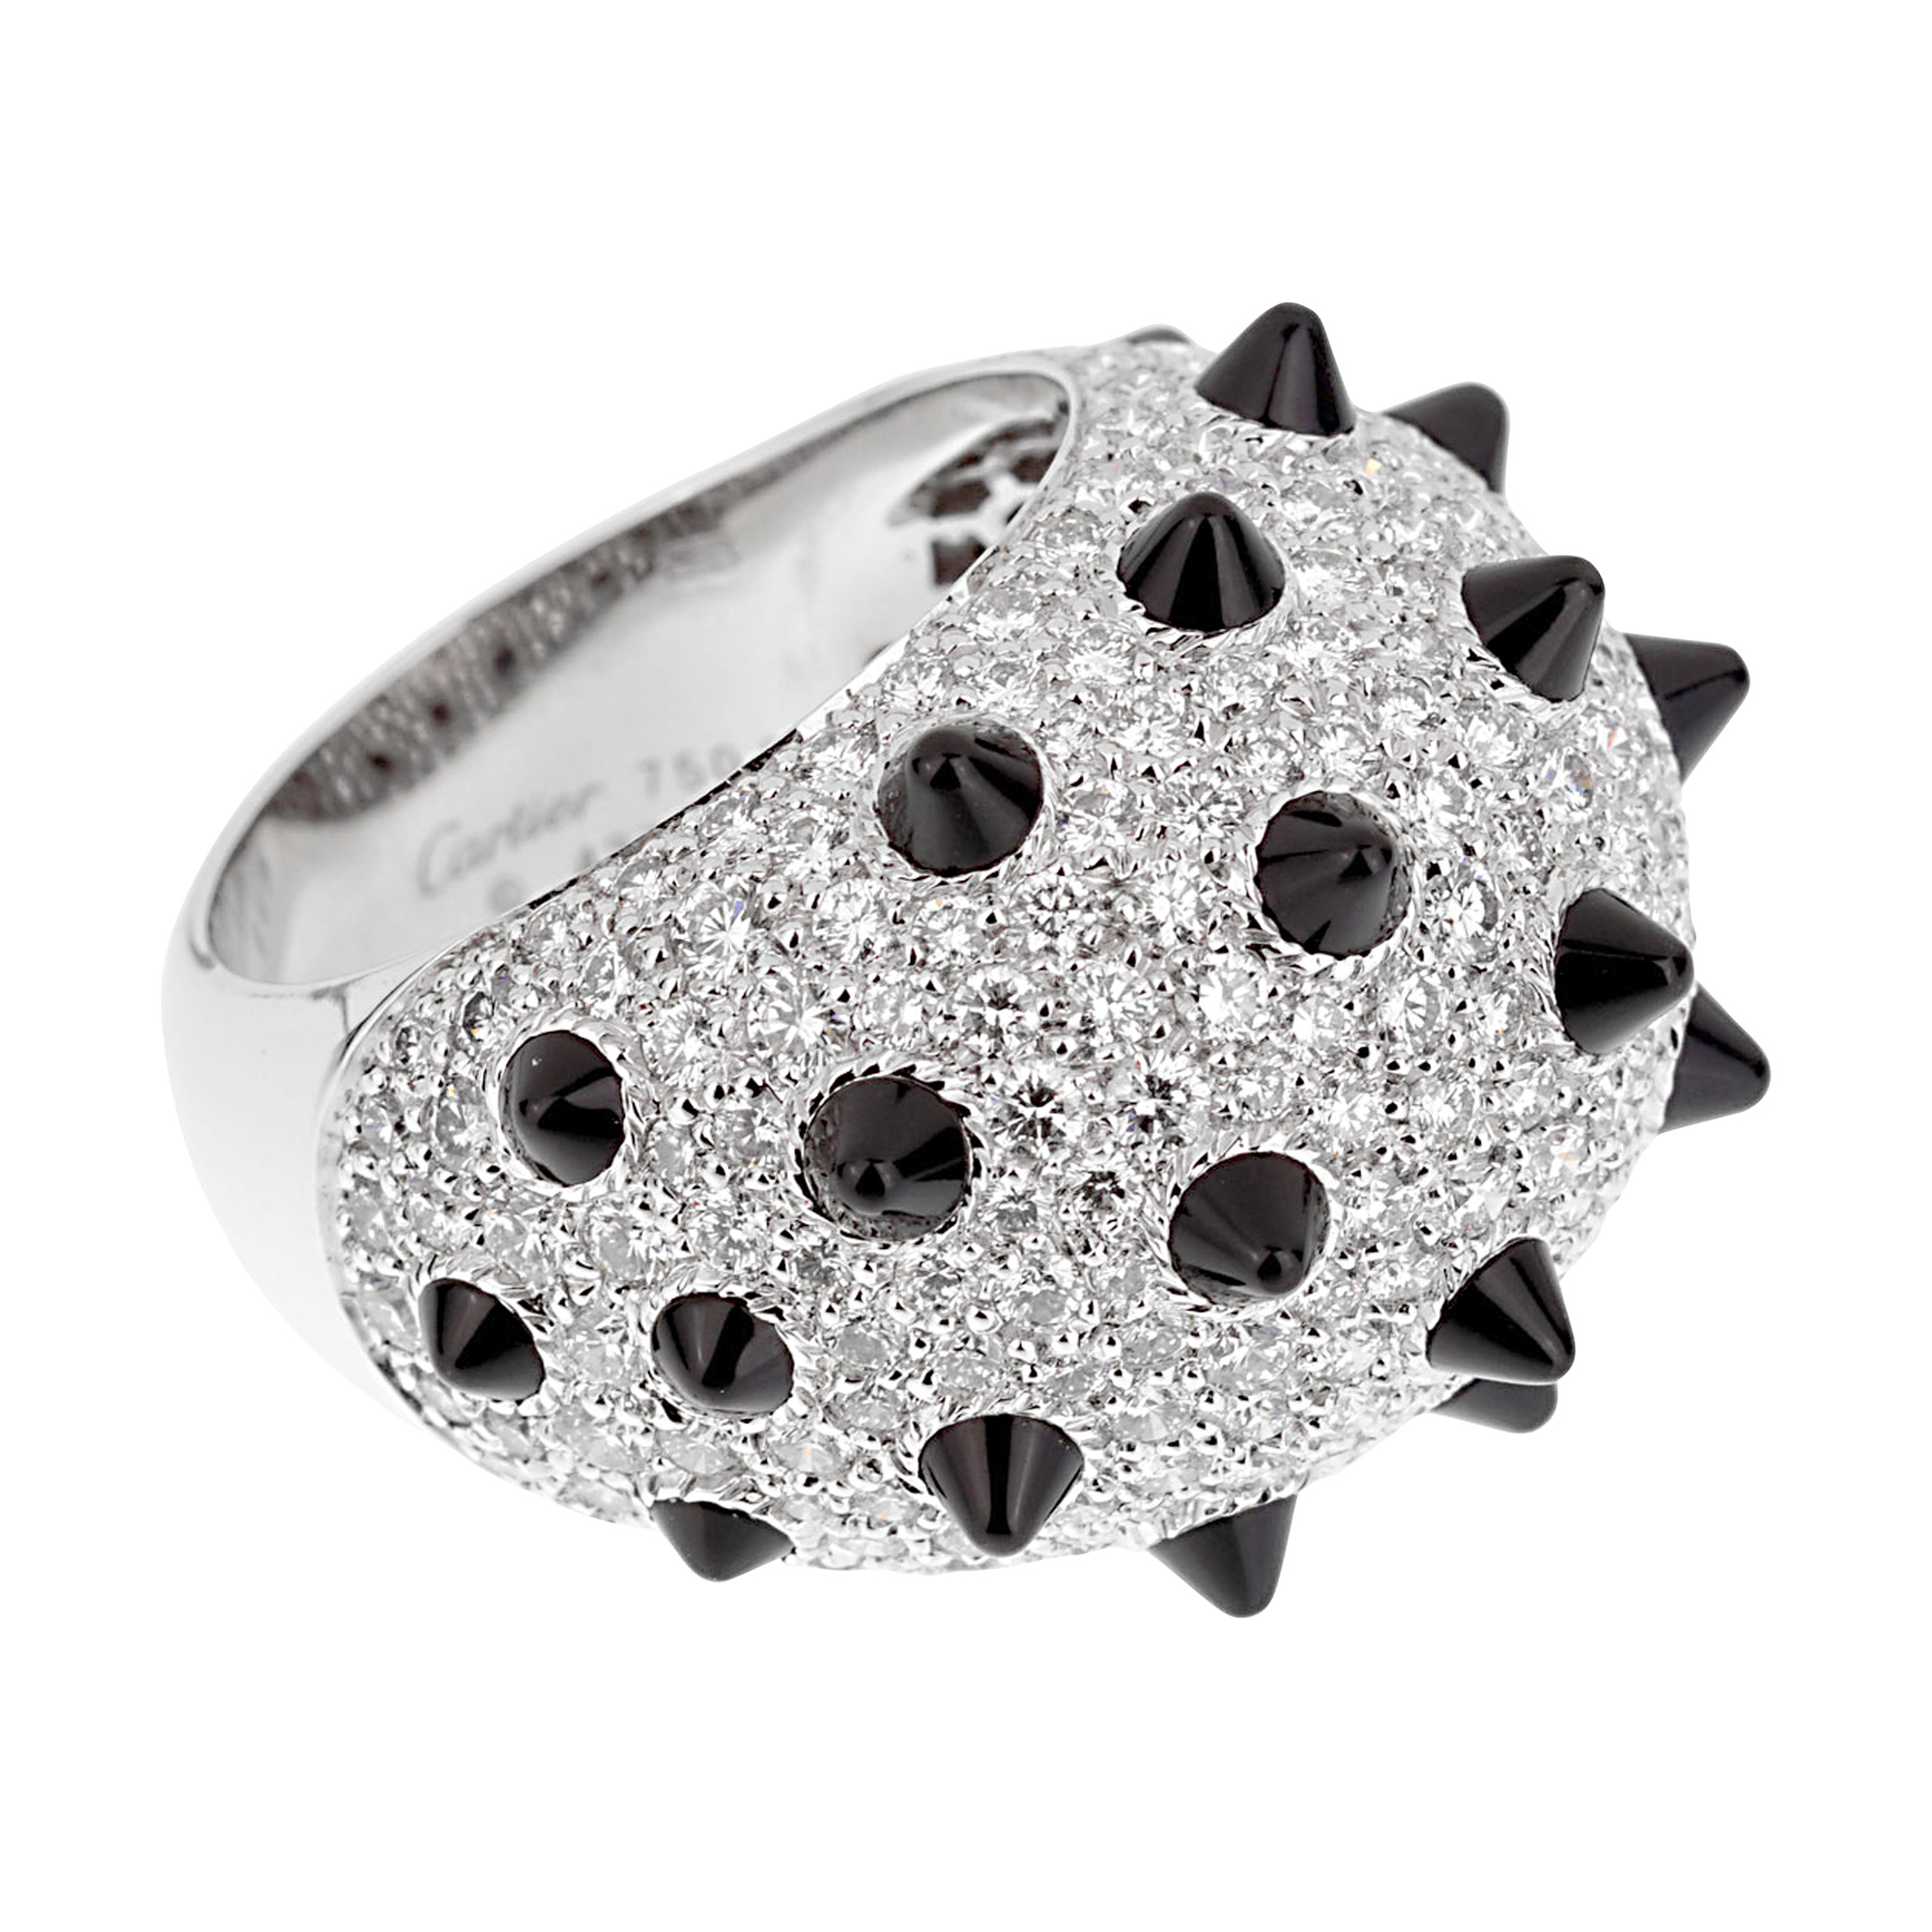 White gold diamond and onyx spike ring, Exquisite jewelry piece, Unique and elegant design, Sophistication meets edginess, 2000x2000 HD Handy